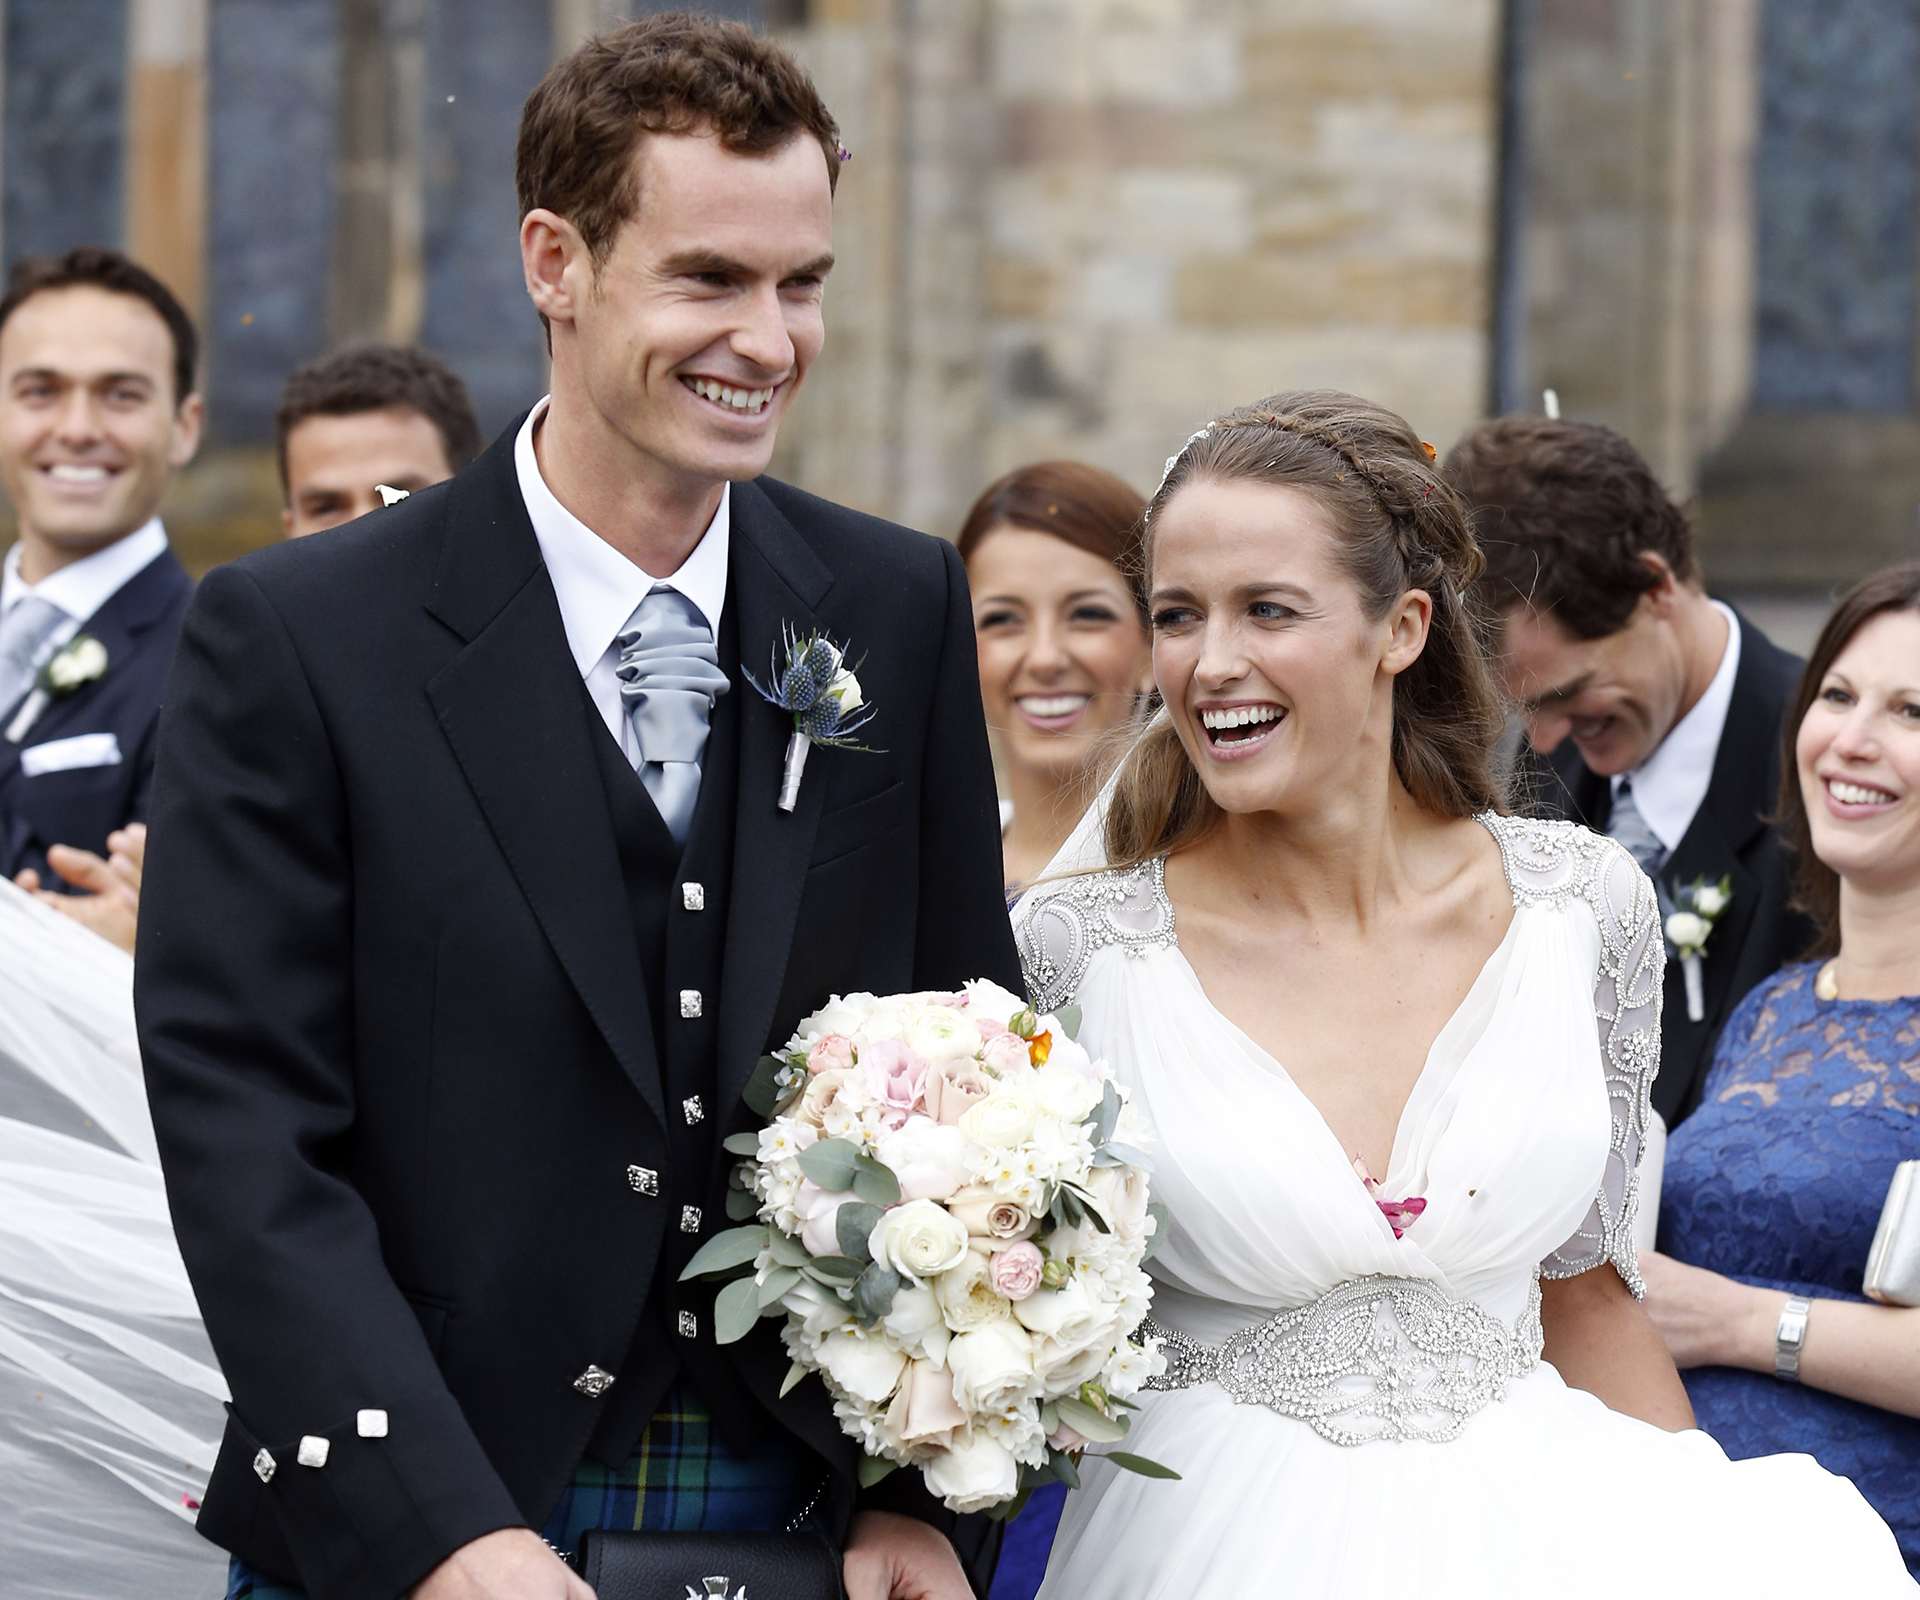 IN PICTURES: Andy Murray and Kim Sears tie the knot